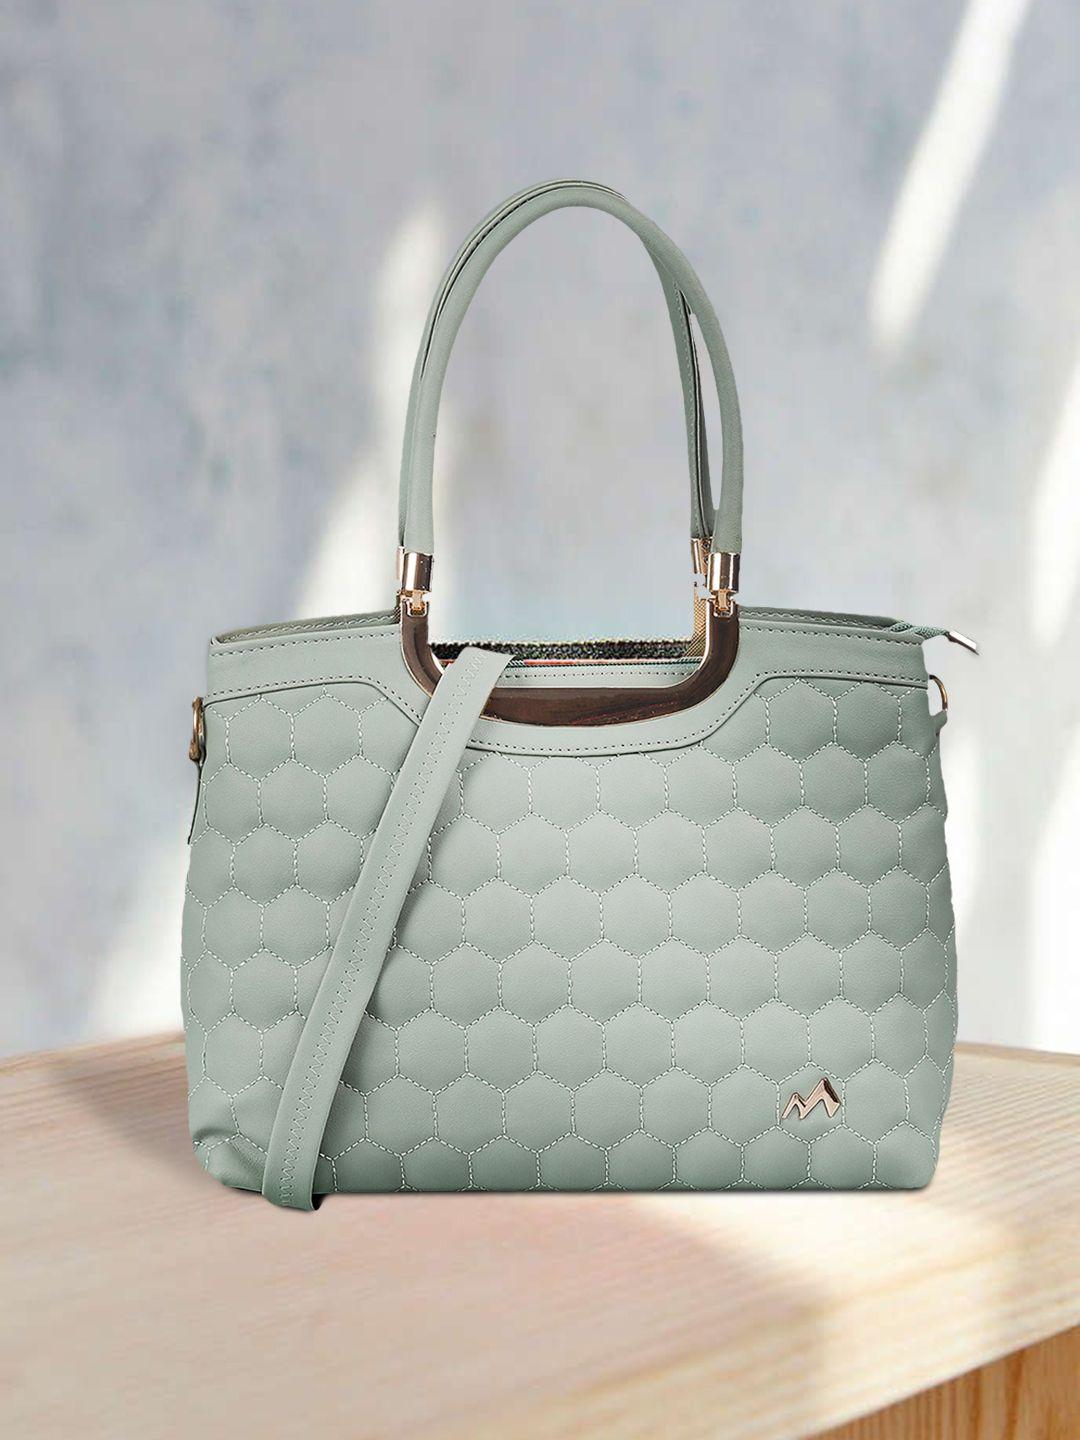 metro mint green quilted textured structured handheld bag